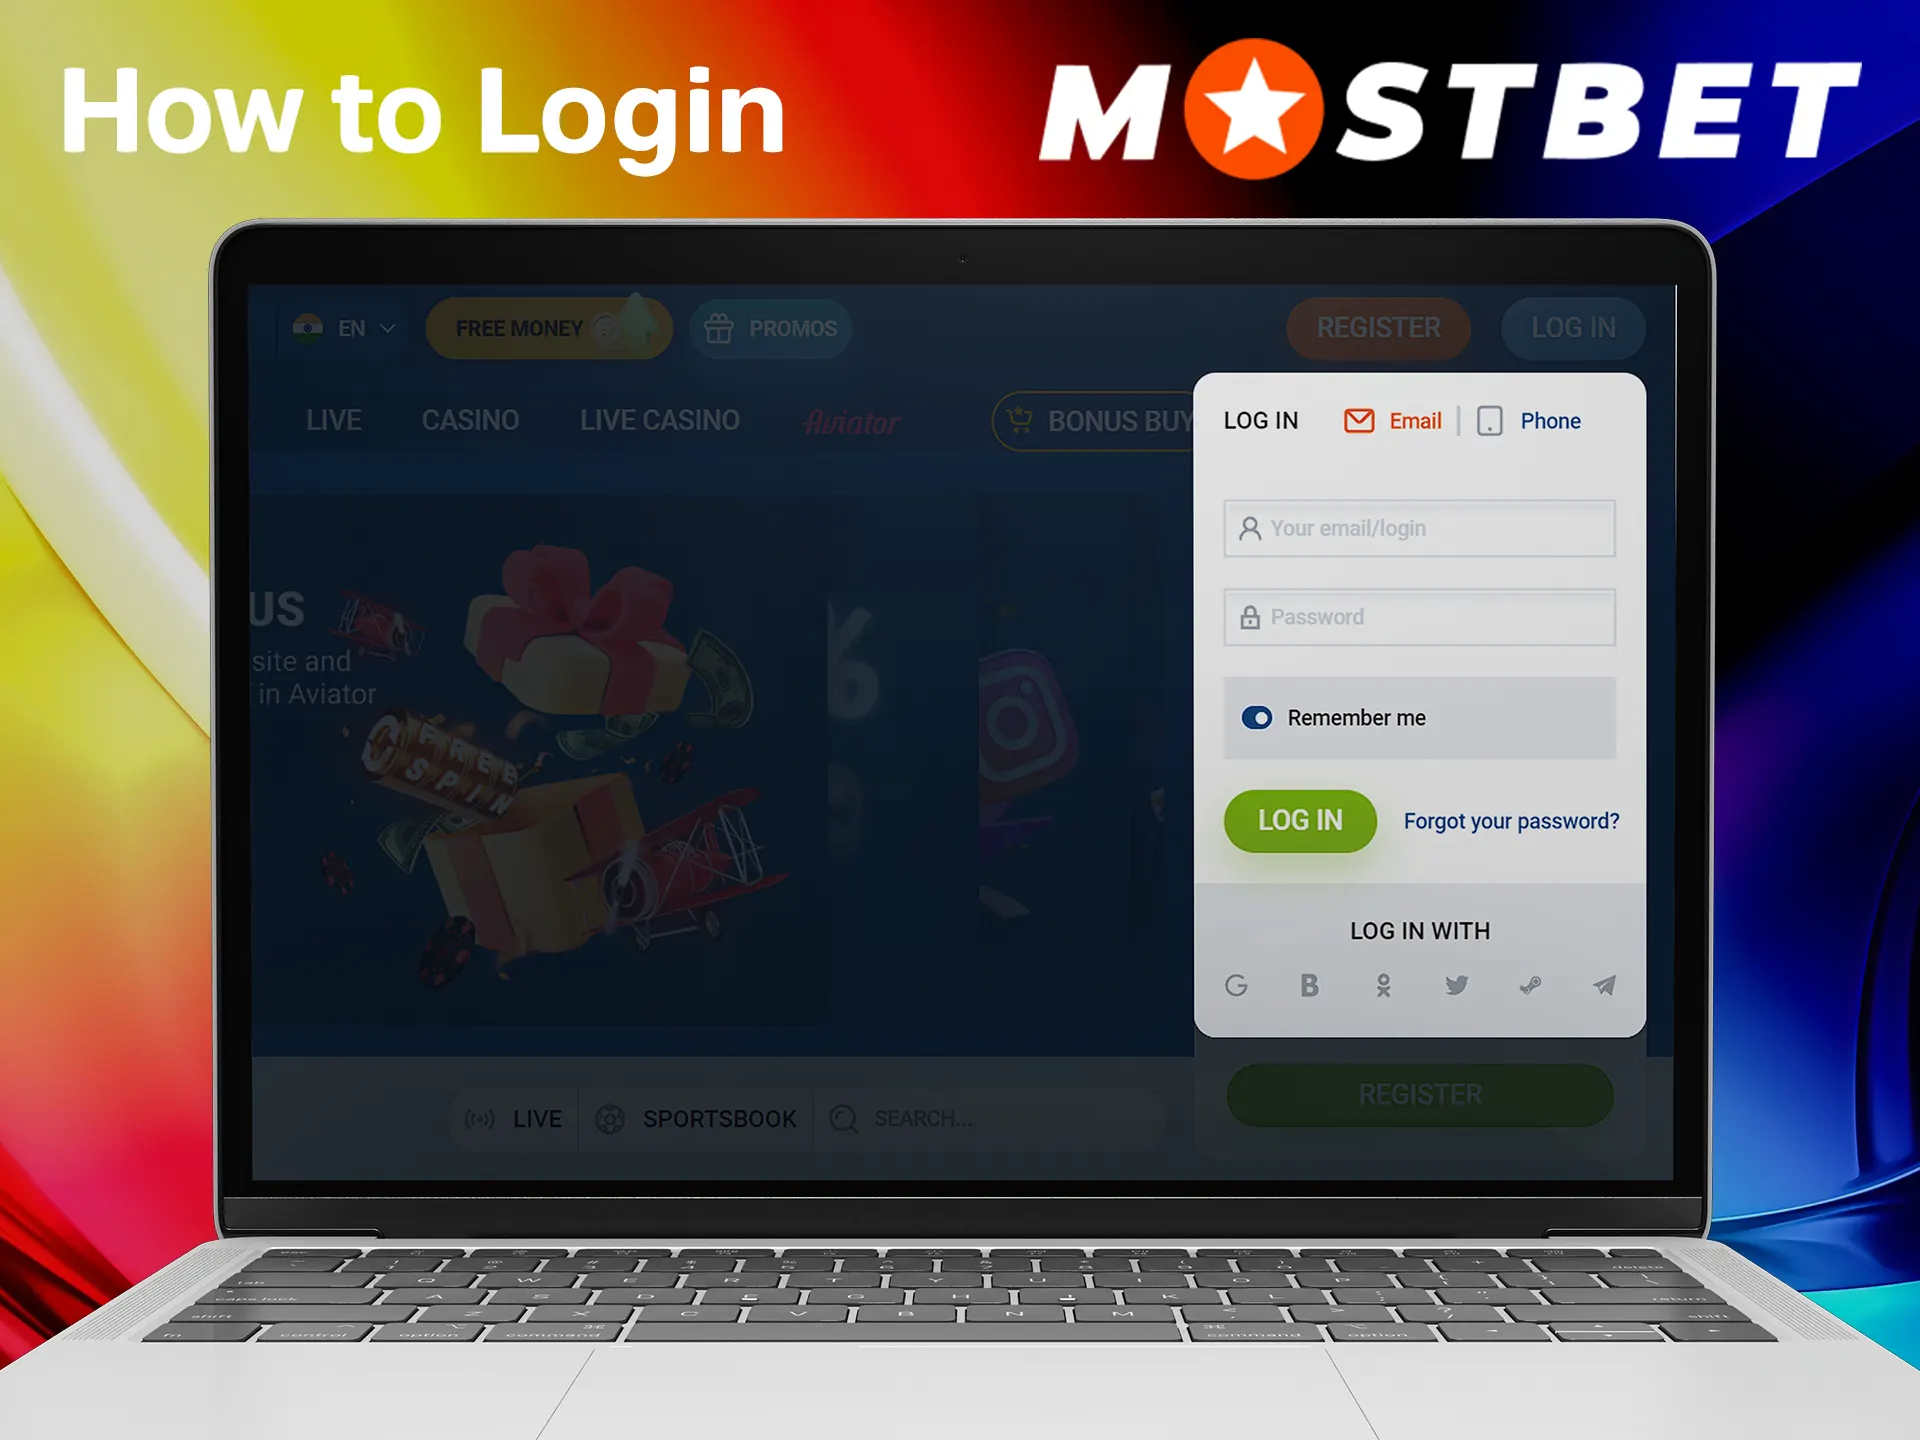 Use your existing Mostbet account to log in.